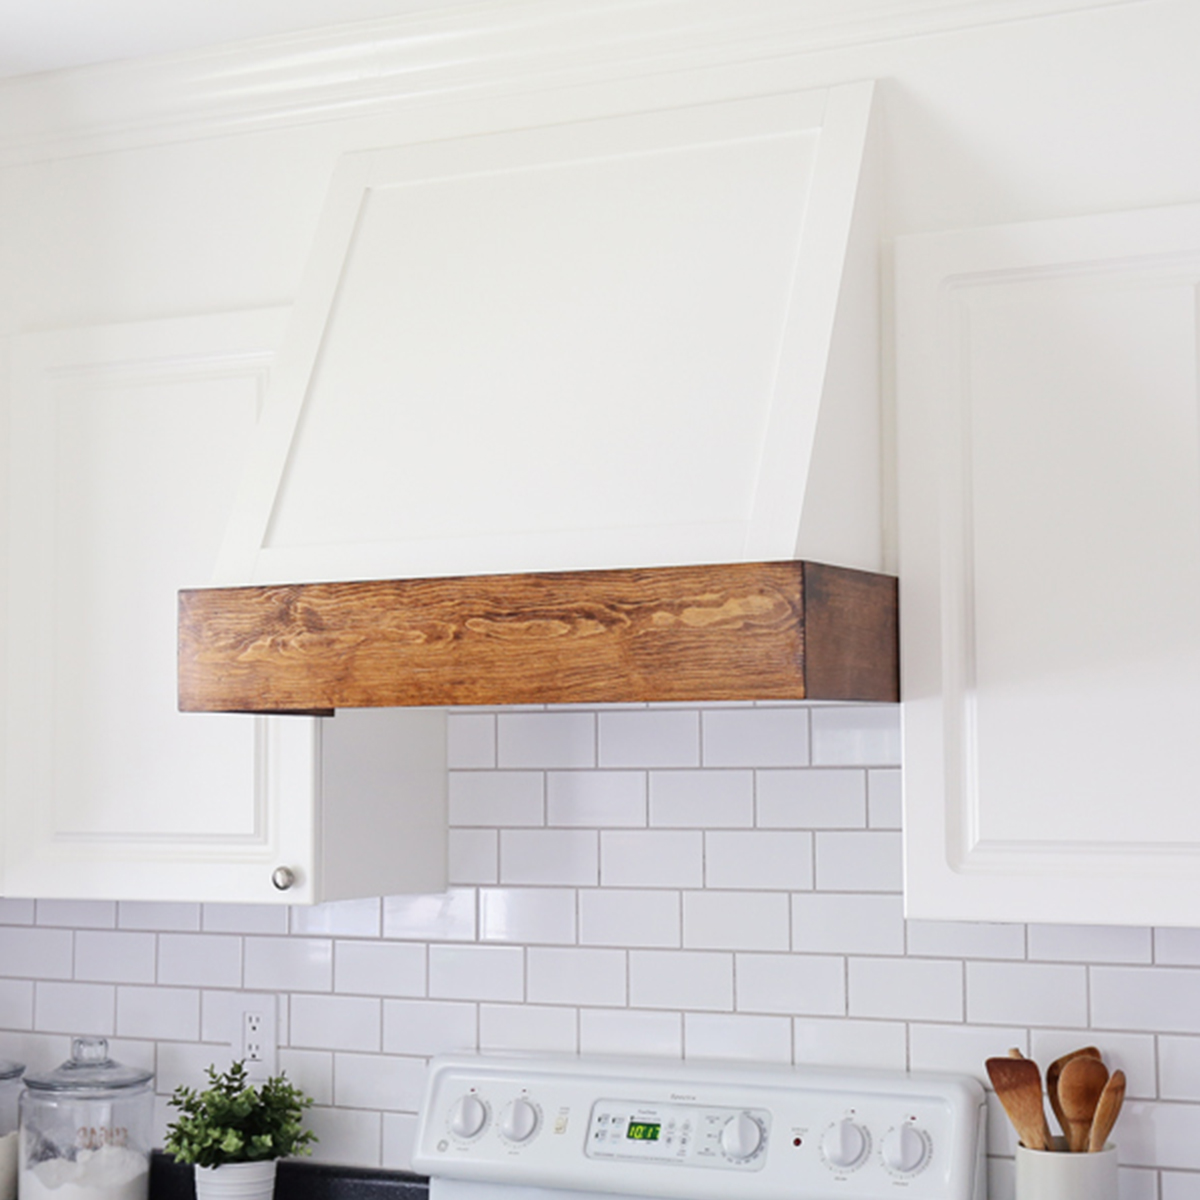 DIY Range Hood Cover with stained wood and white paint